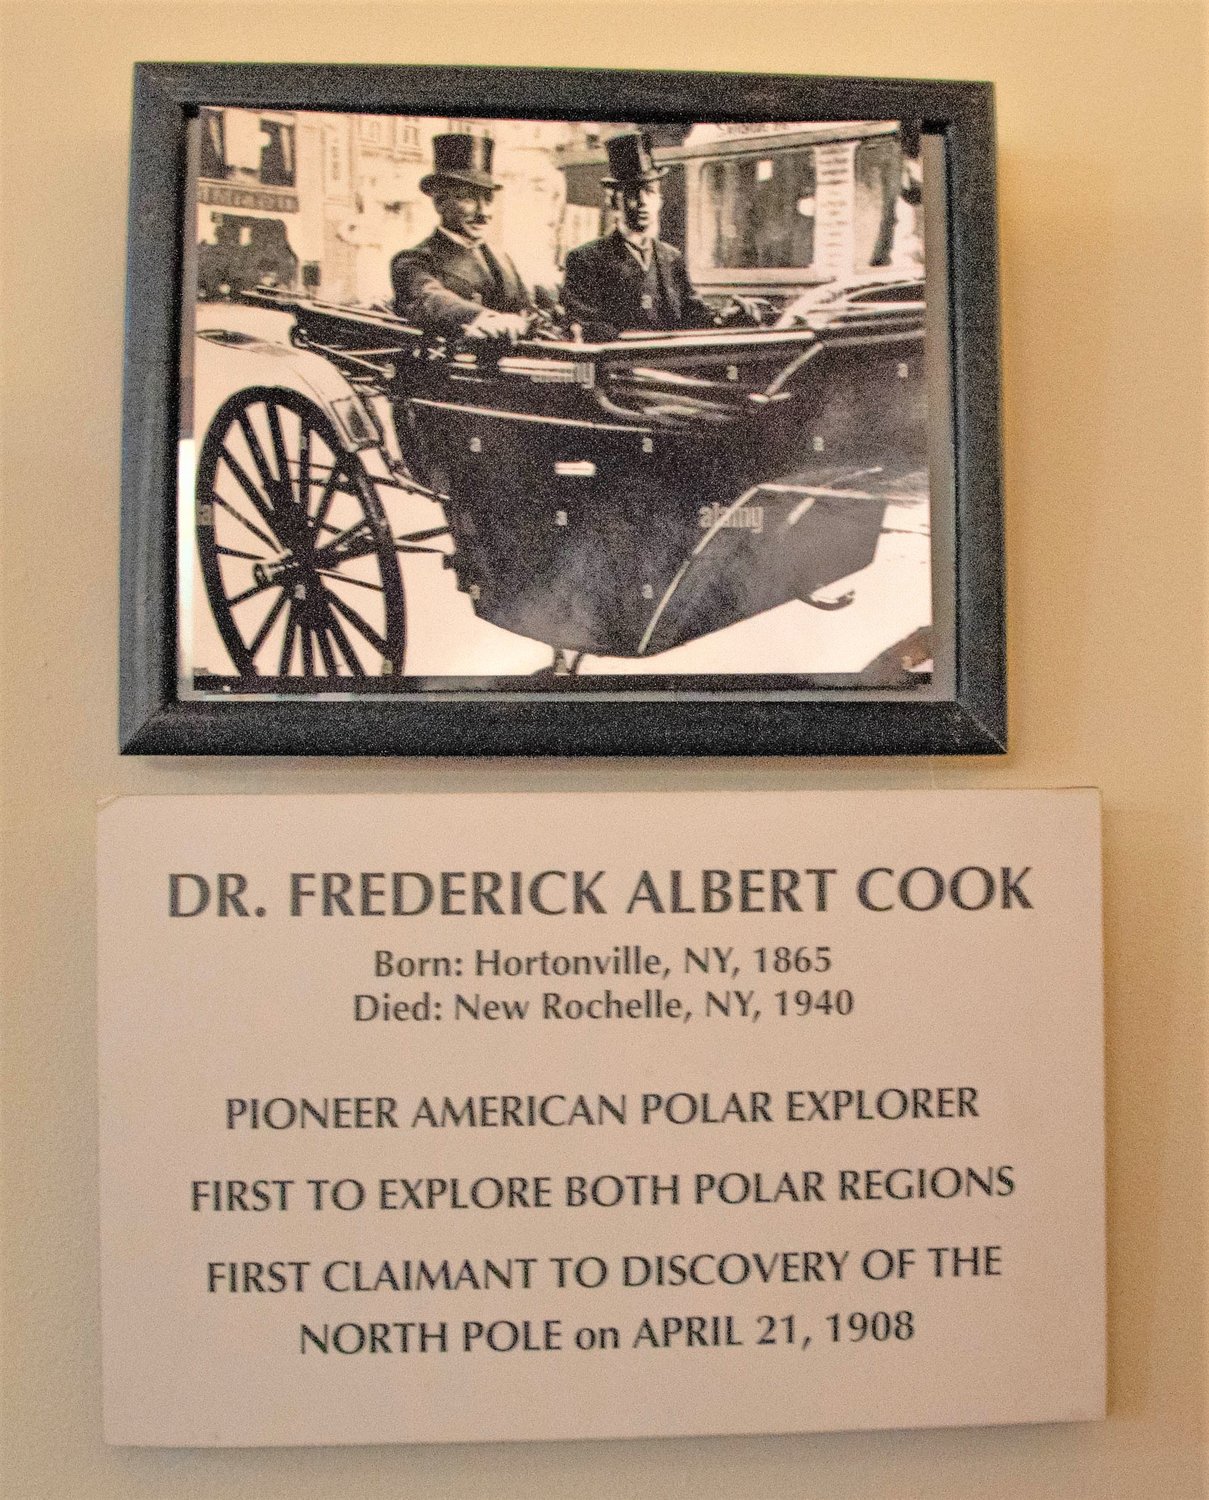 Dr. Frederick Cook was the first claimant to the discovery of the North Pole, according to this note at the Sullivan County Museum. He was also the first to explore both polar regions.